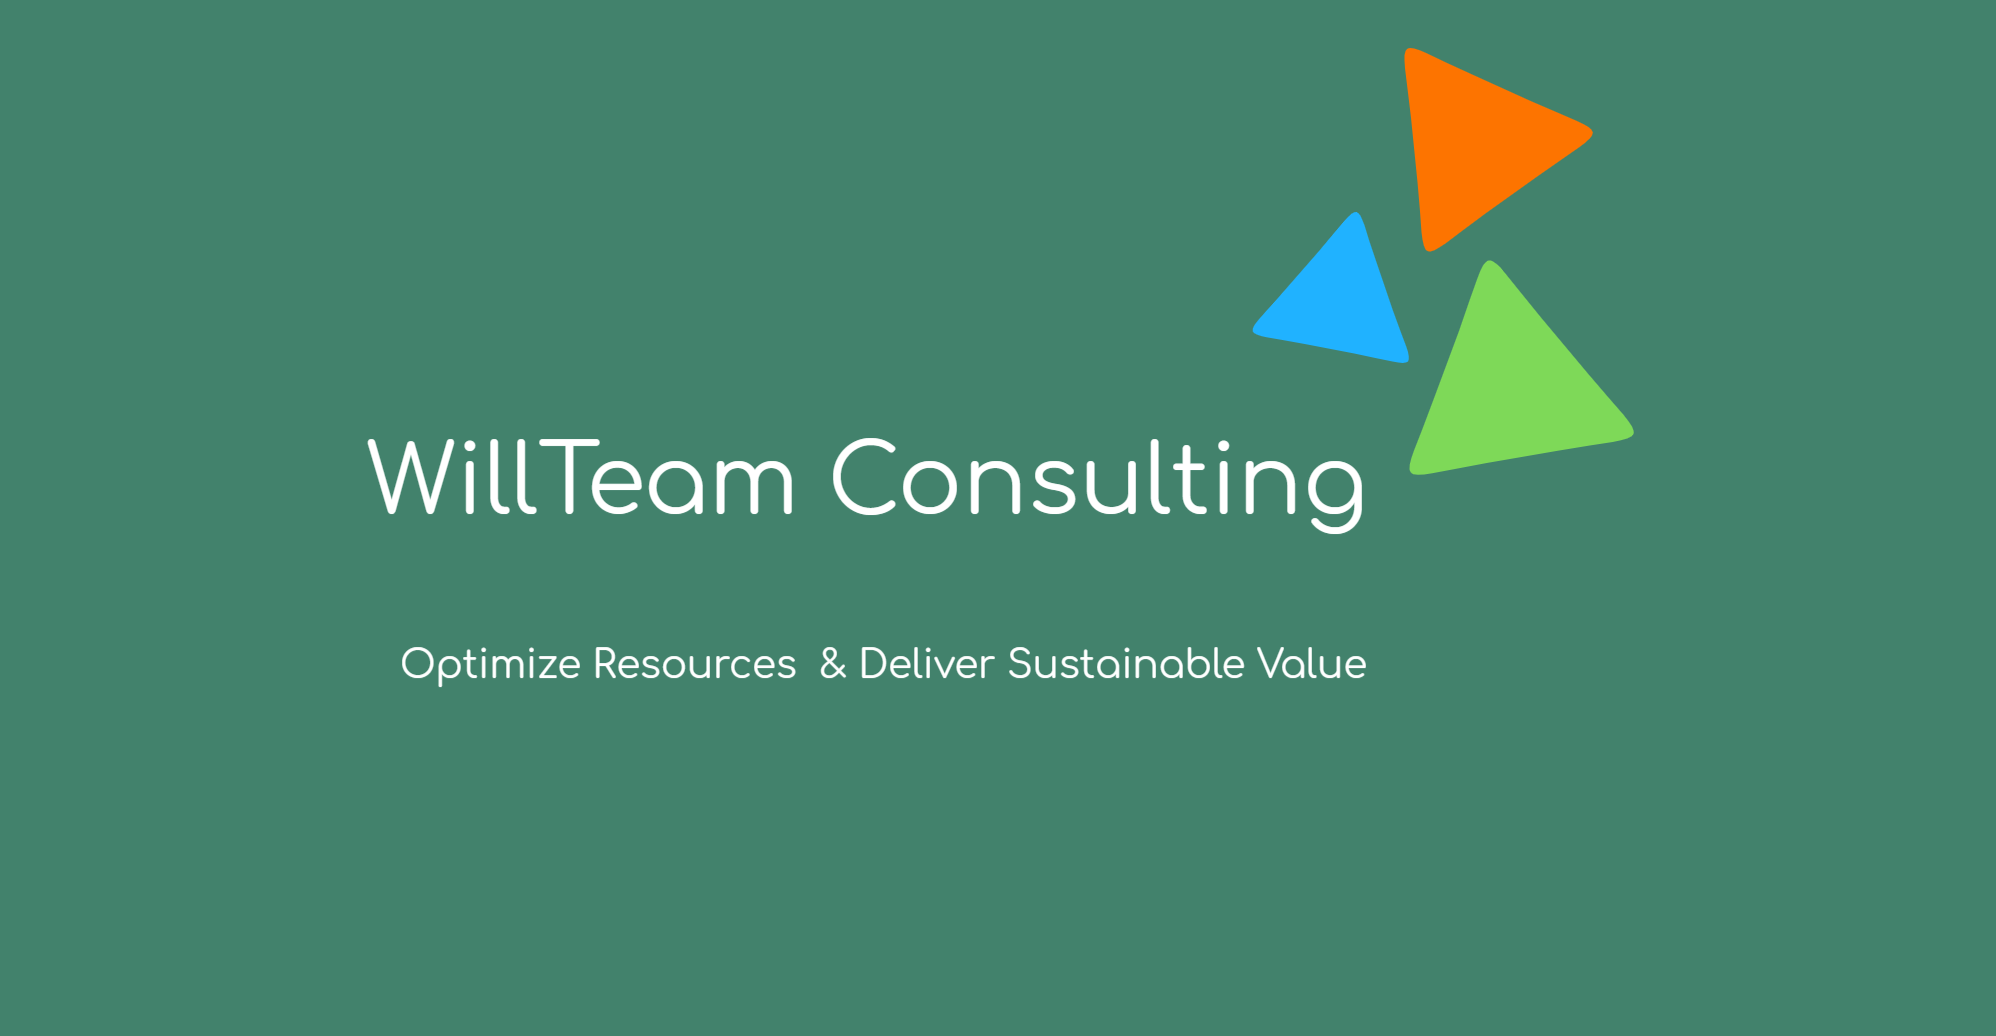 WILL TEAM CONSULTING